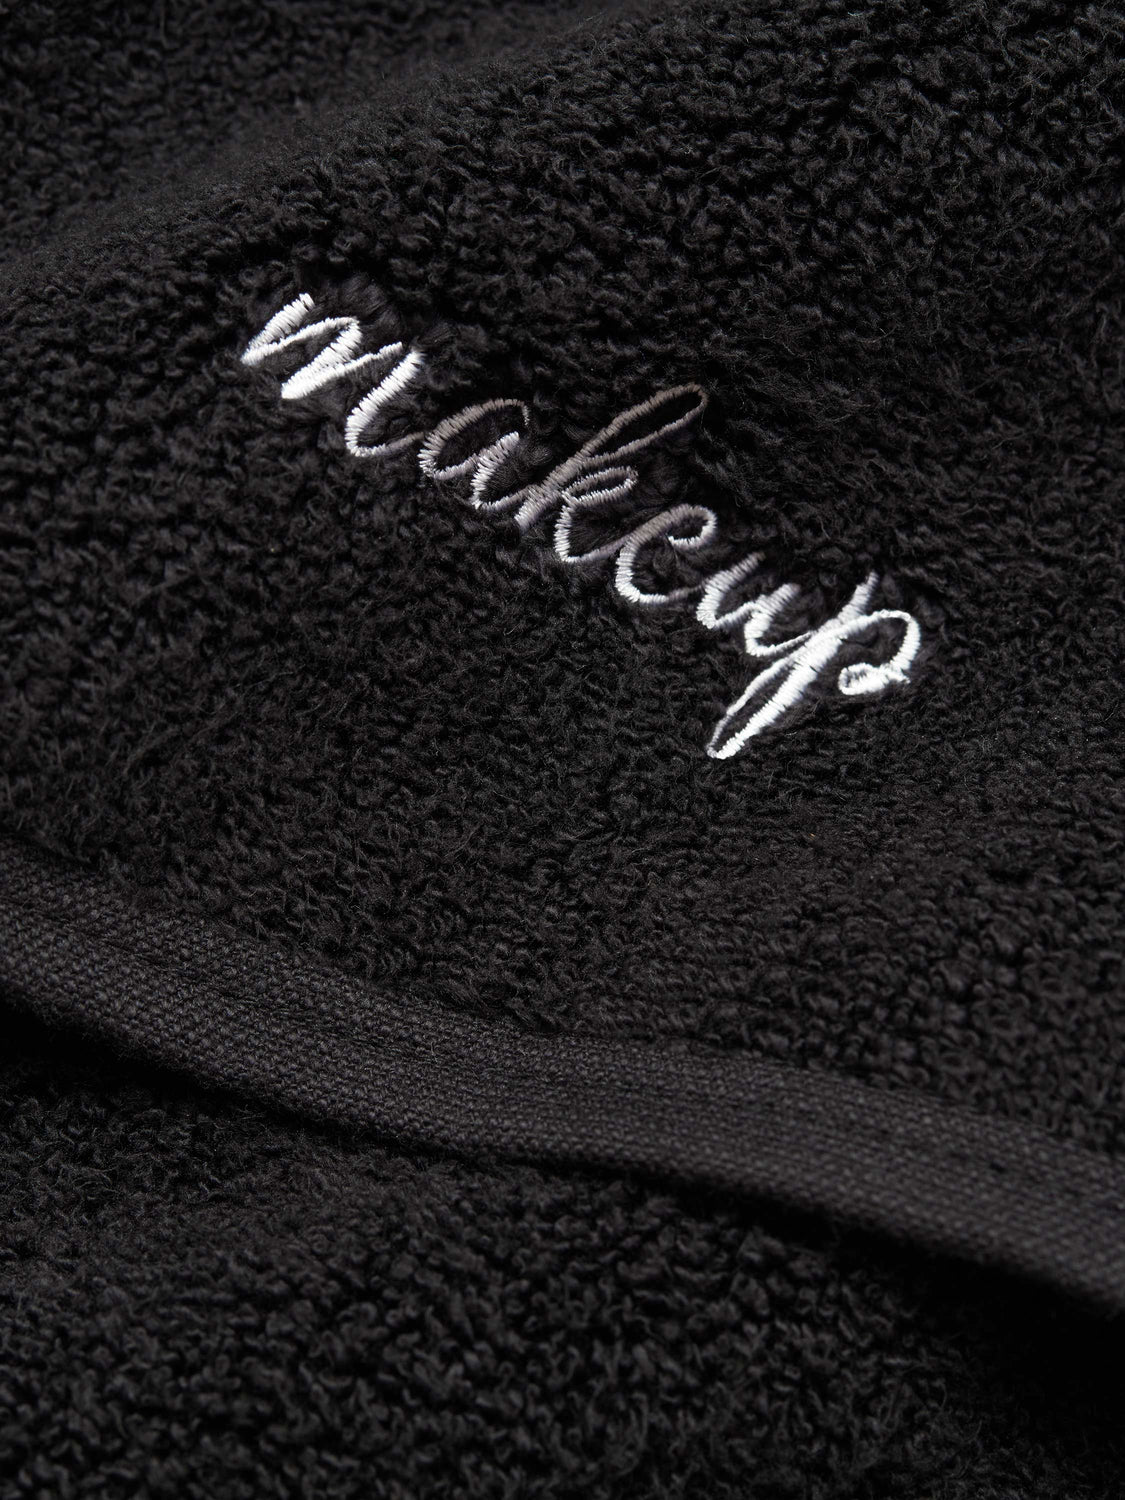 A close-up of a black makeup towel with the word "makeup" embroidered in white.